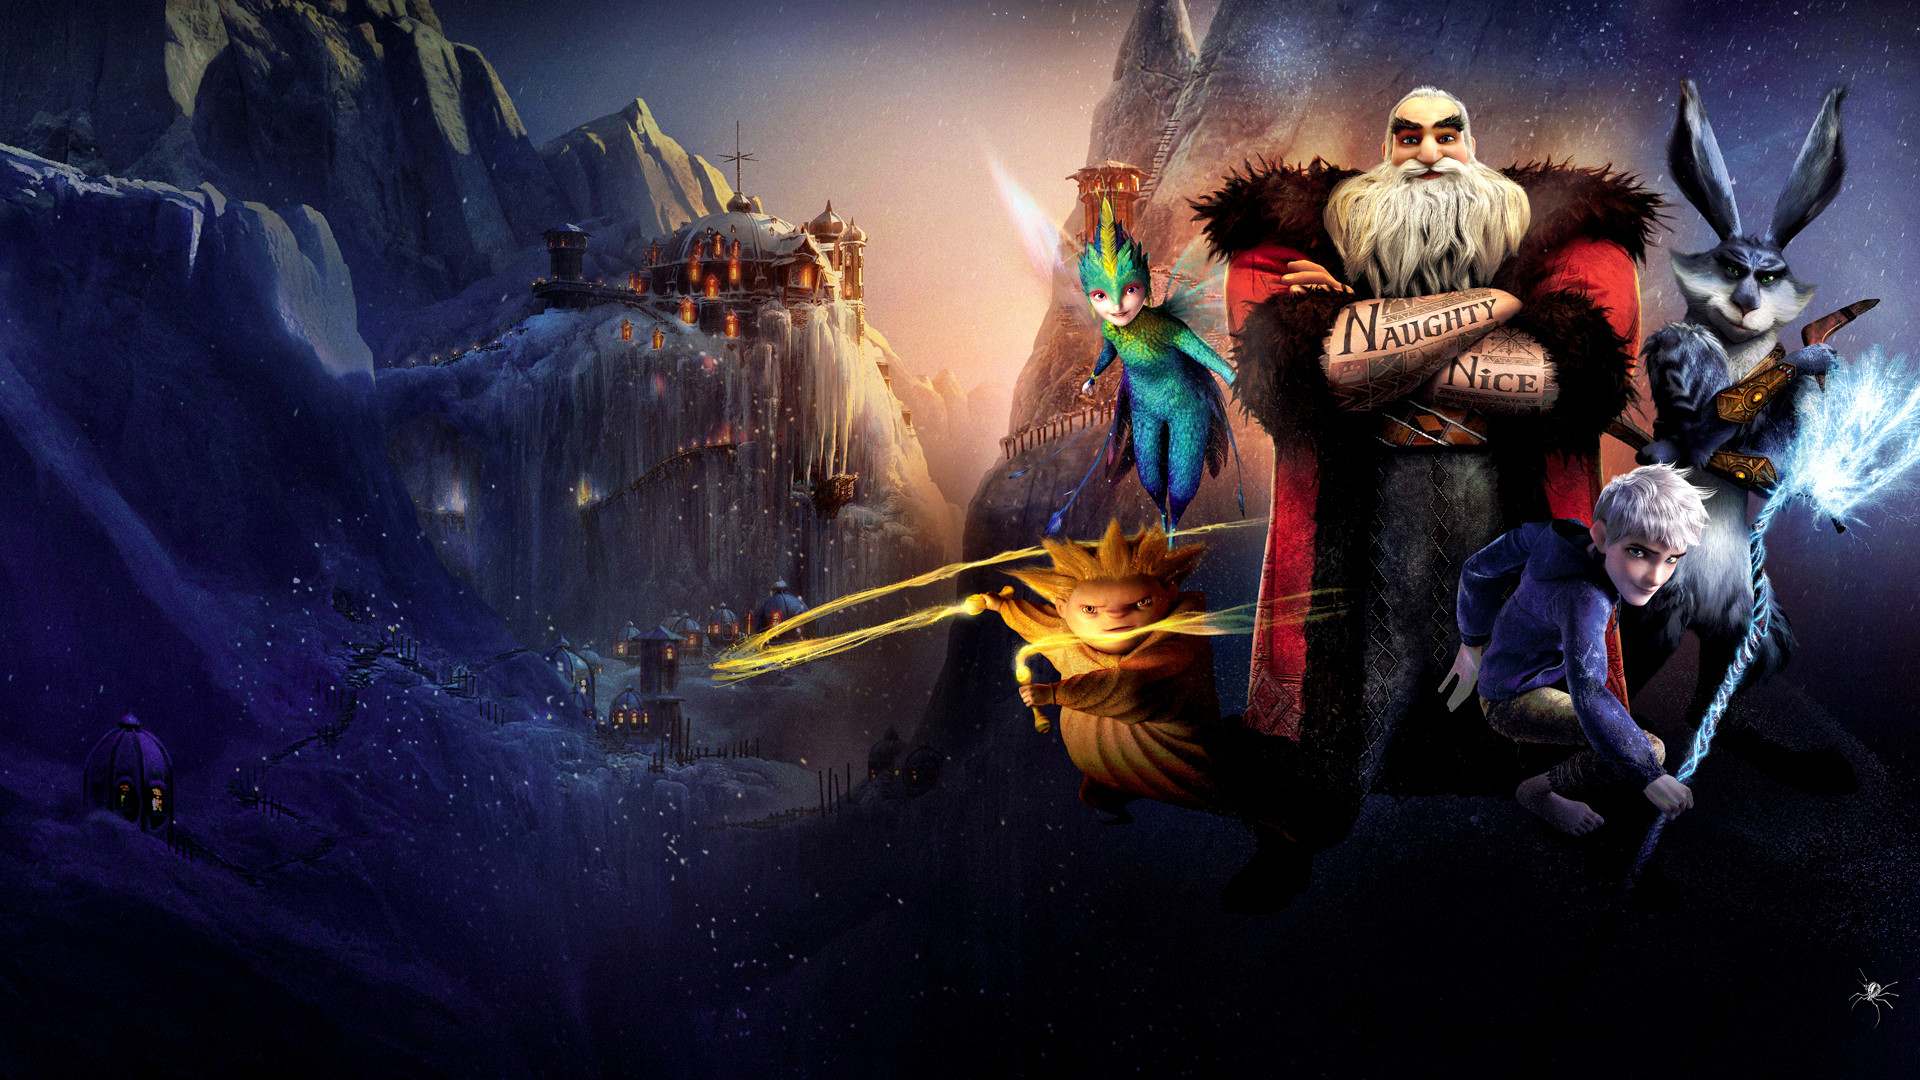 Rise Of The Guardians Movie Wallpapers Sizzlingwallpapers – Part 3